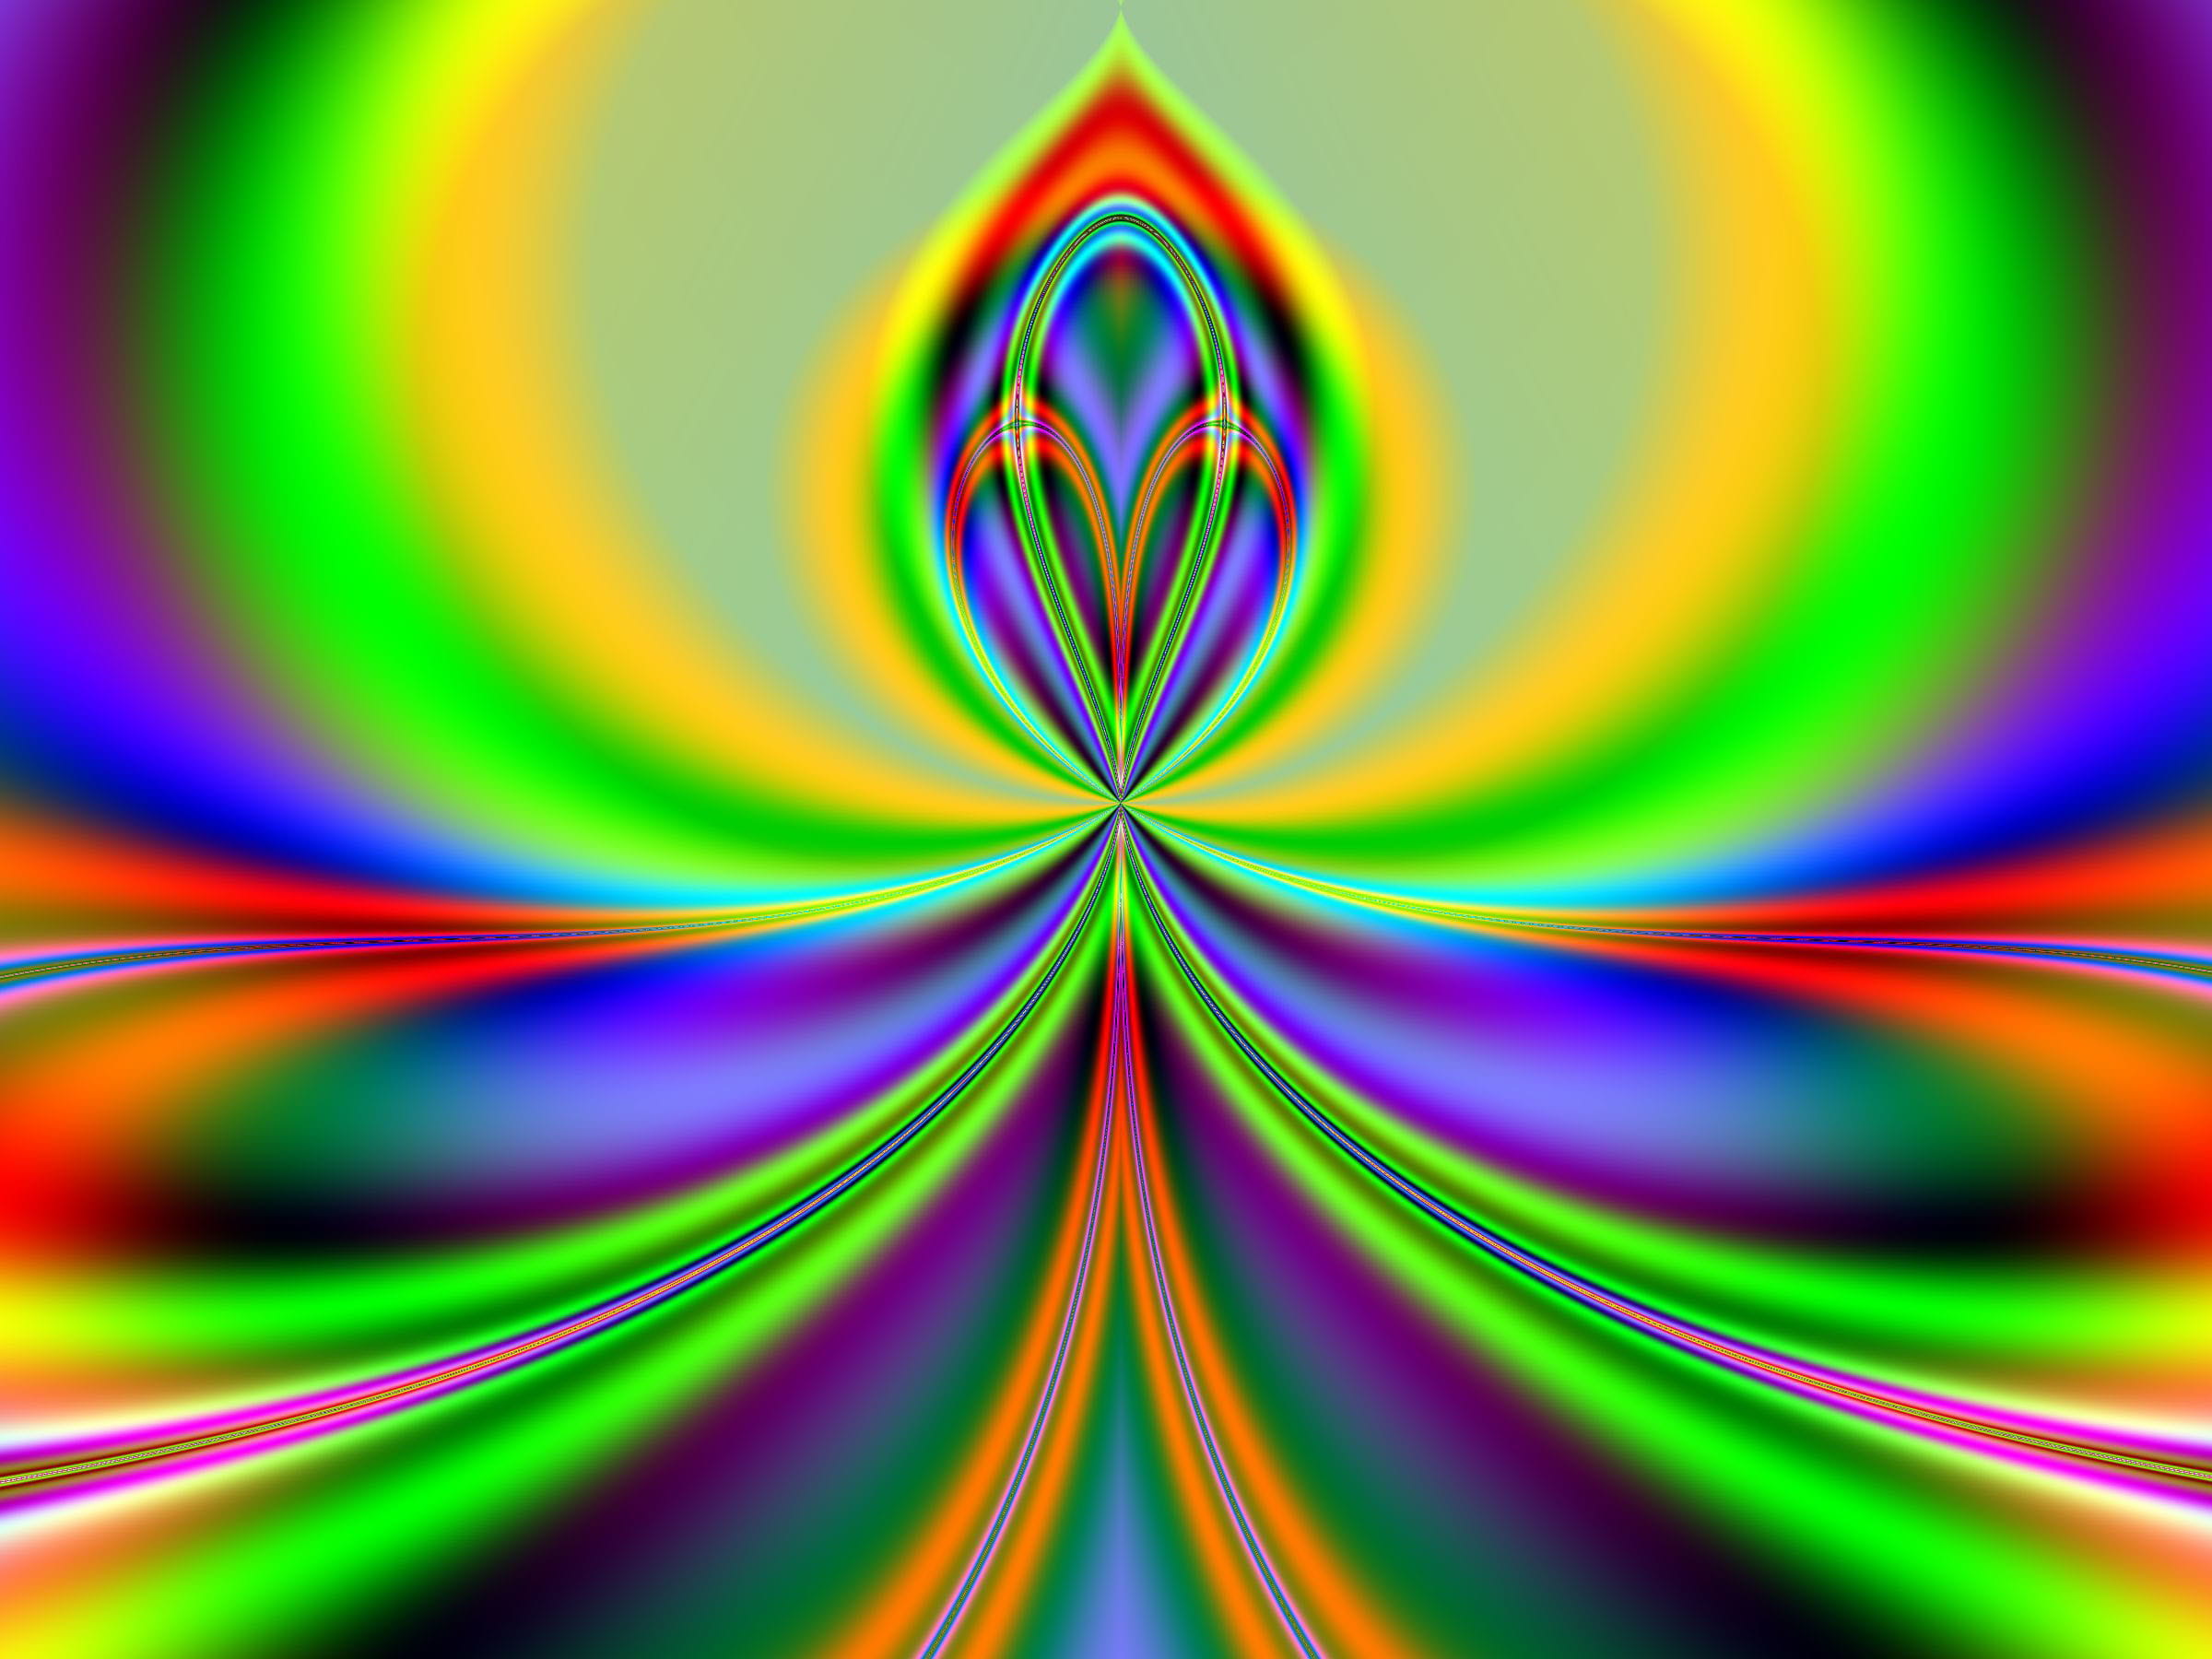 Fractal-based abstract symmetrical background pattern, colourful